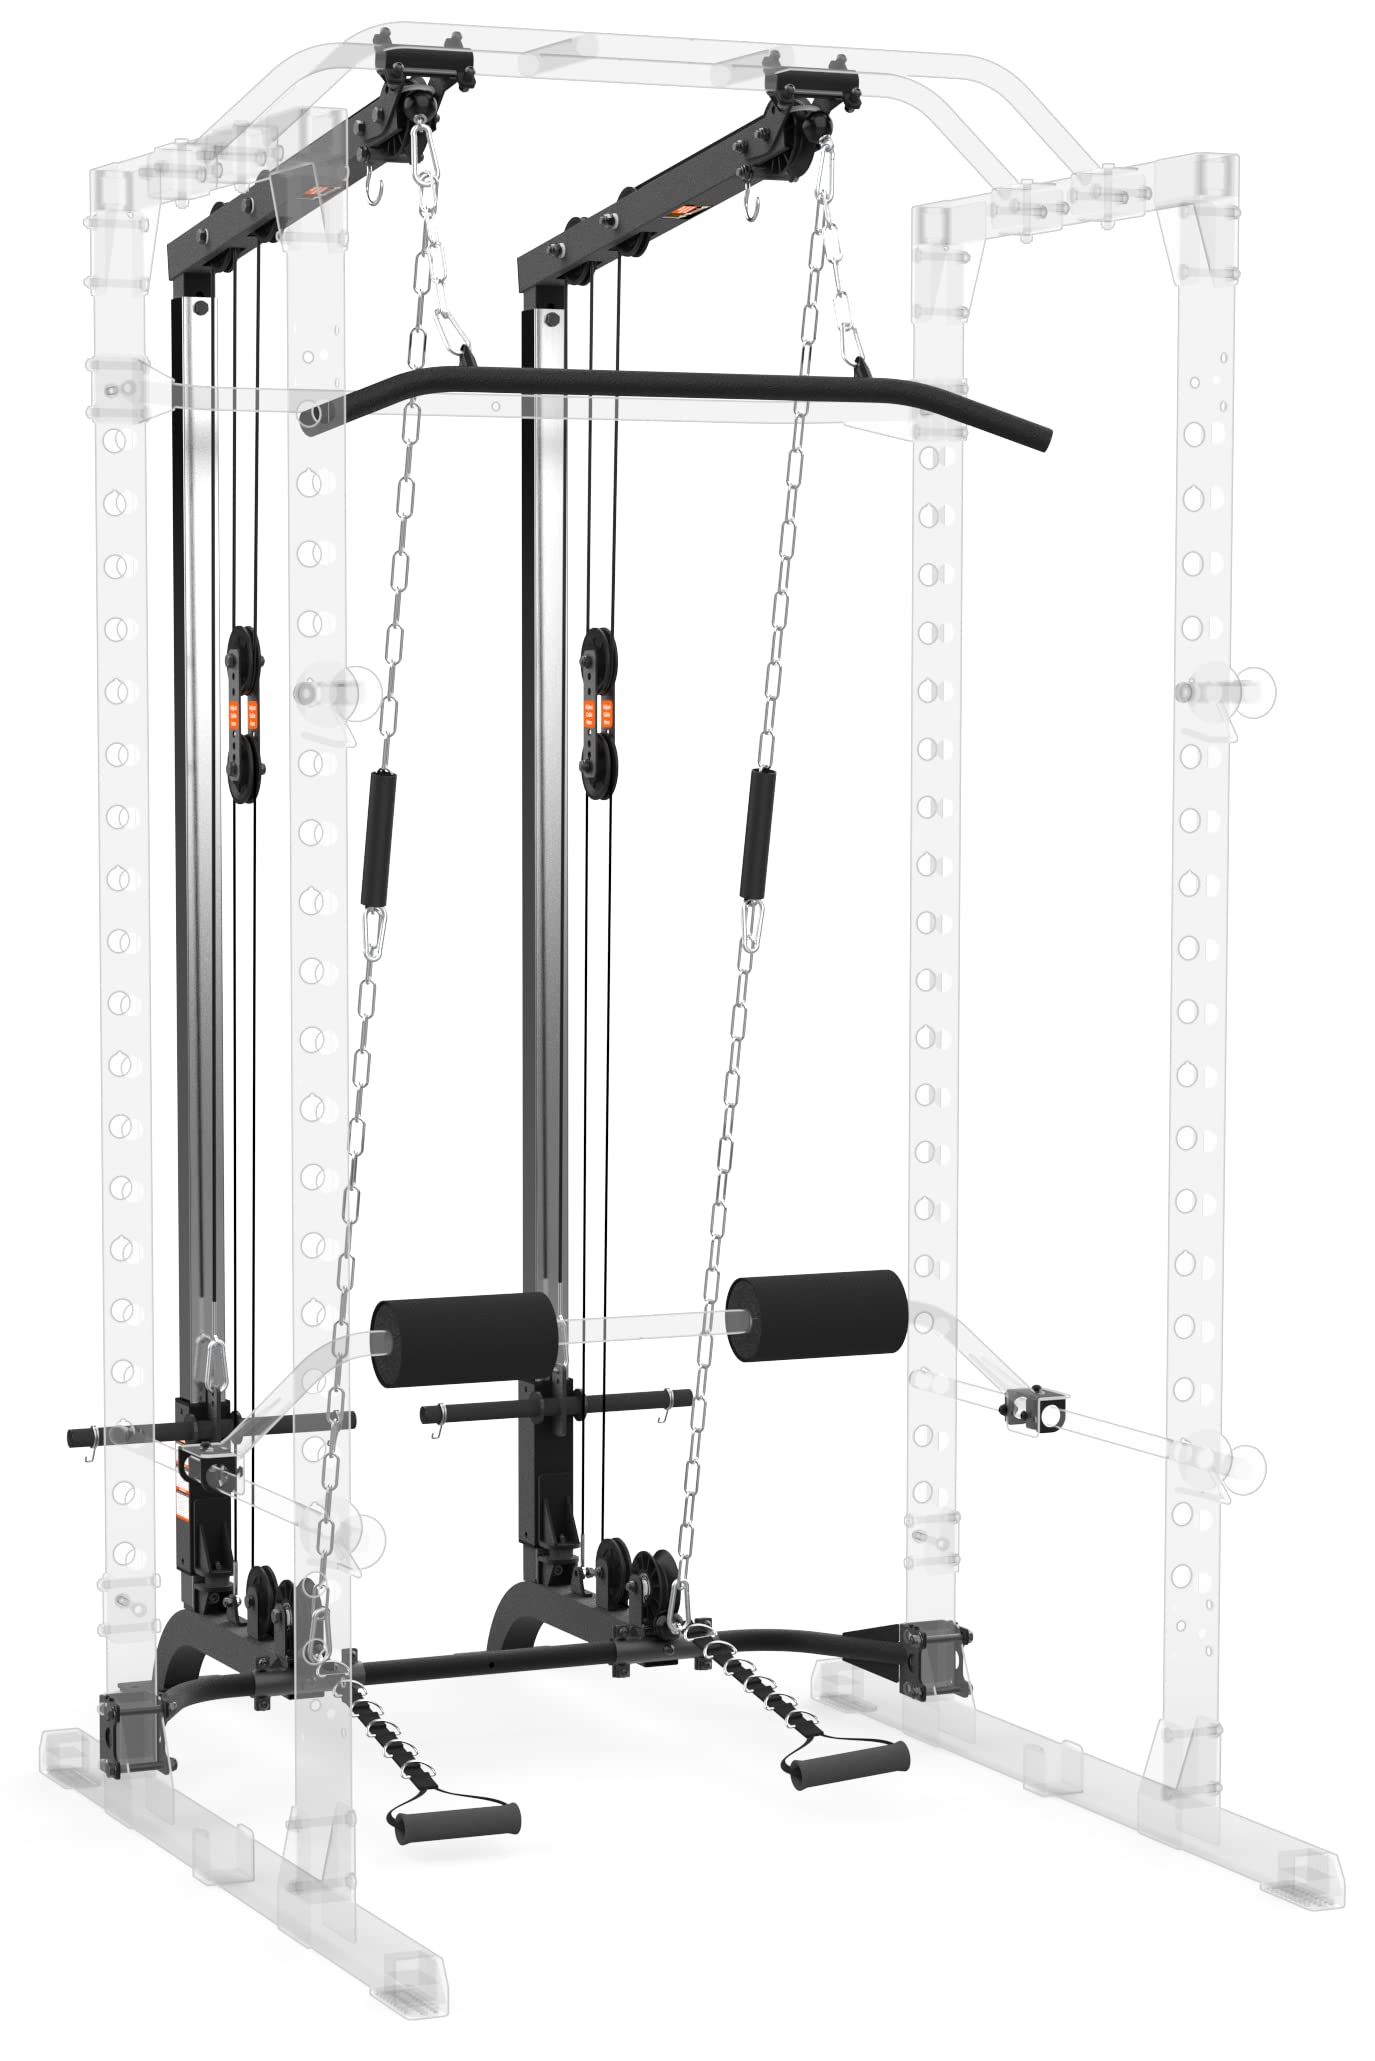 Fitness Reality Super Max 810 XLT Rack Power Cage w/ Optional LAT Pulldown and Leg Holdown Attachments, Squat and Bench Combos $274 + Free Shipping